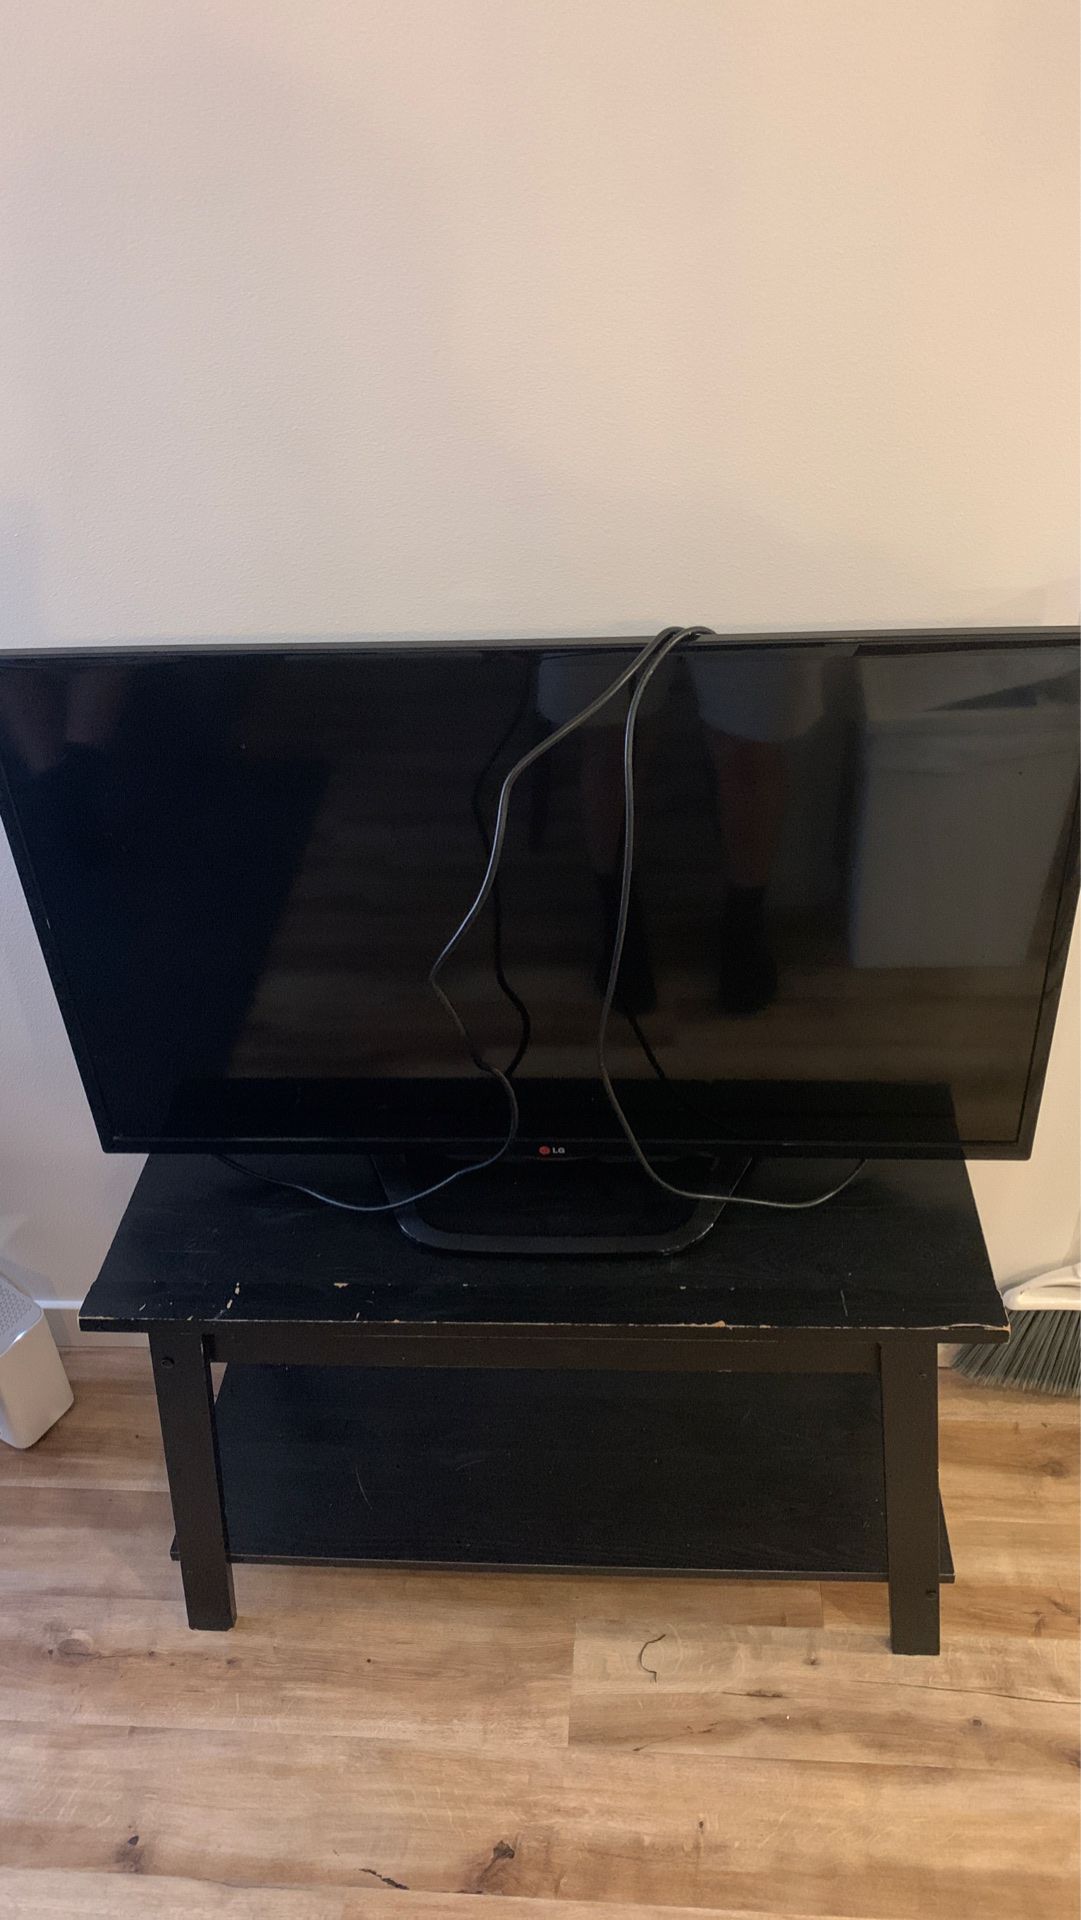 Pending - LG TV and Stand